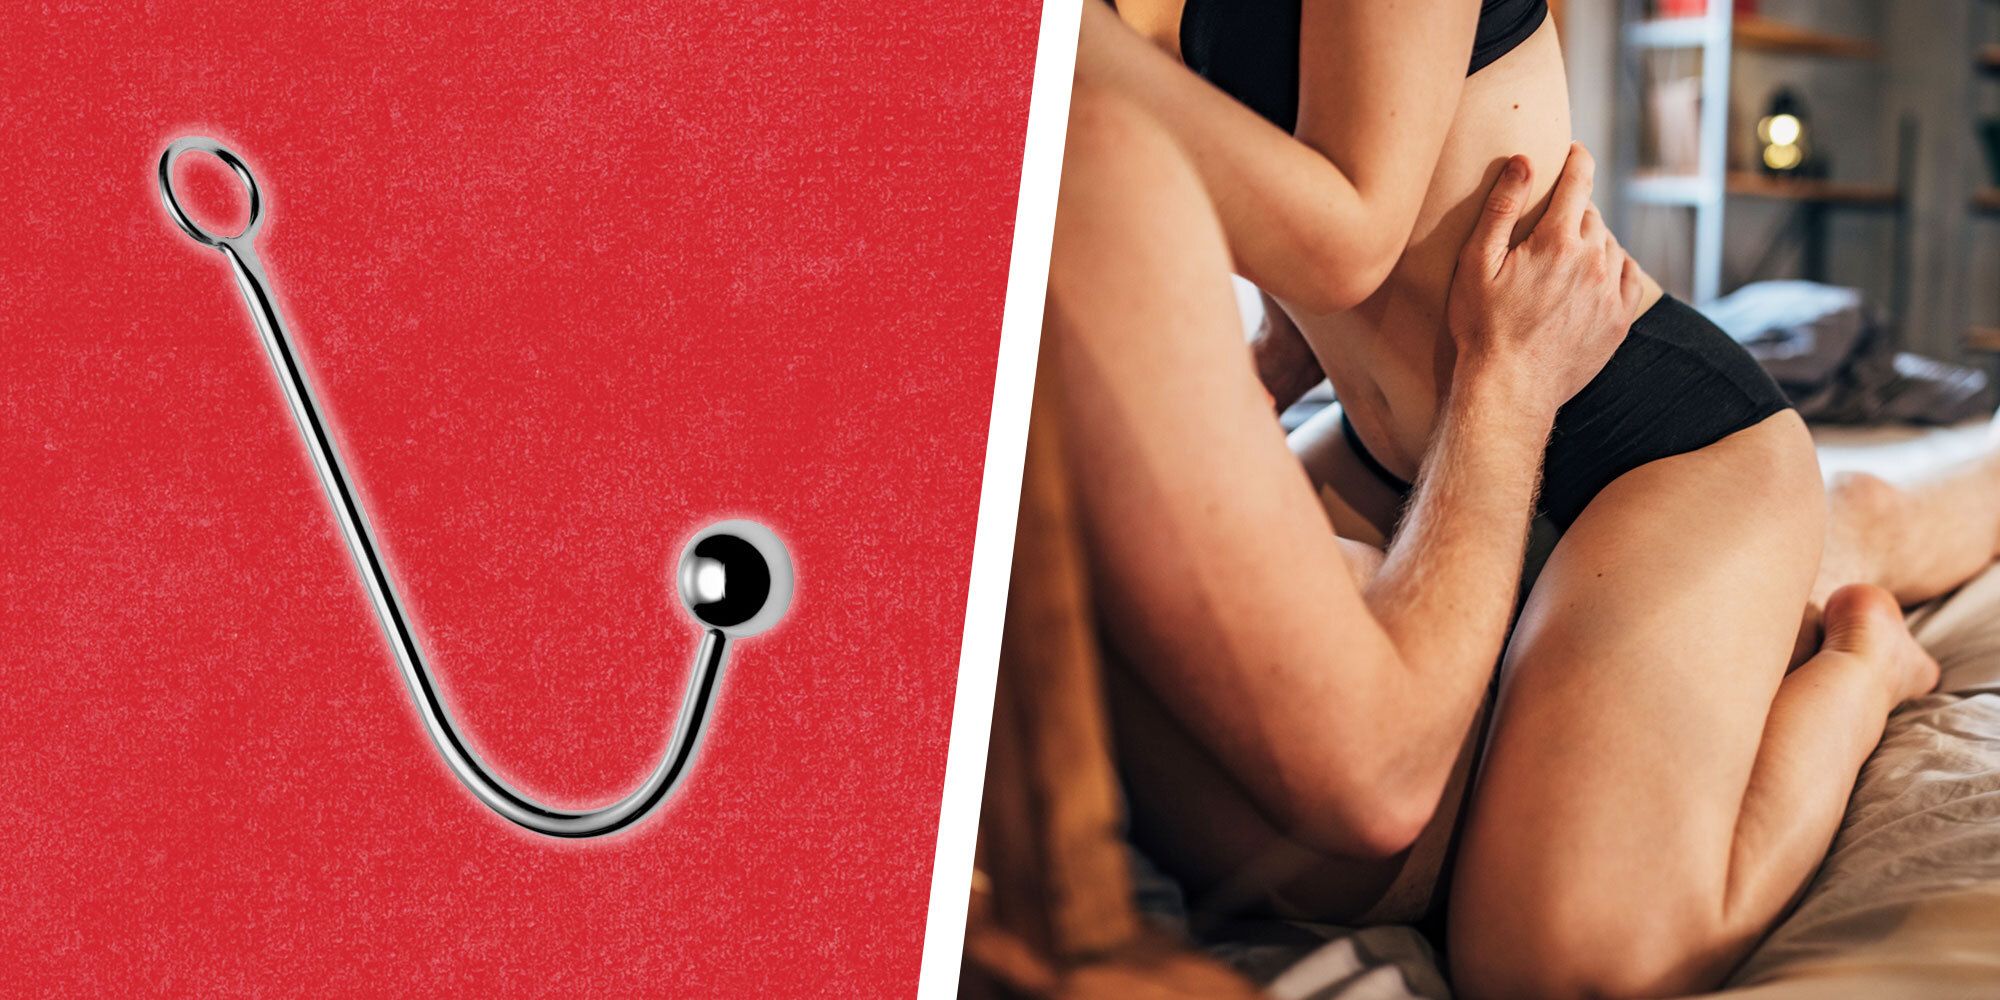 Anal Hooks What They Are and How to Use Them, According to Experts pic